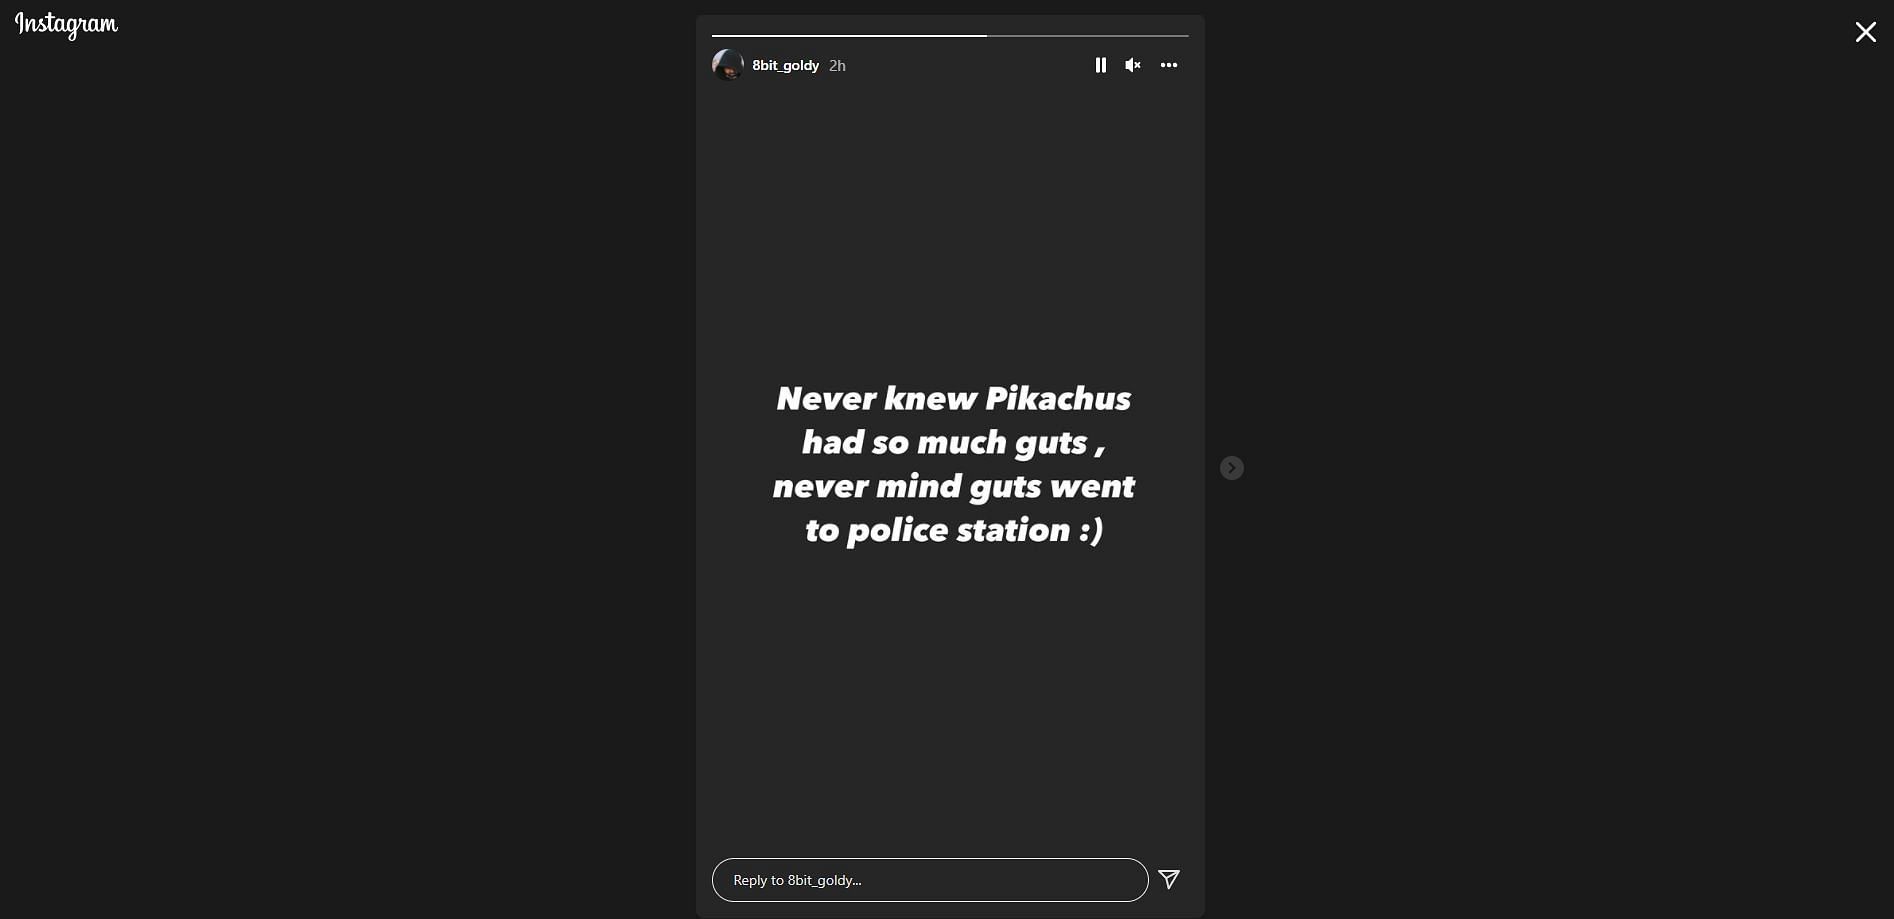 A snippet of his Instagram story (Image via Instagram / 8bit_goldy)